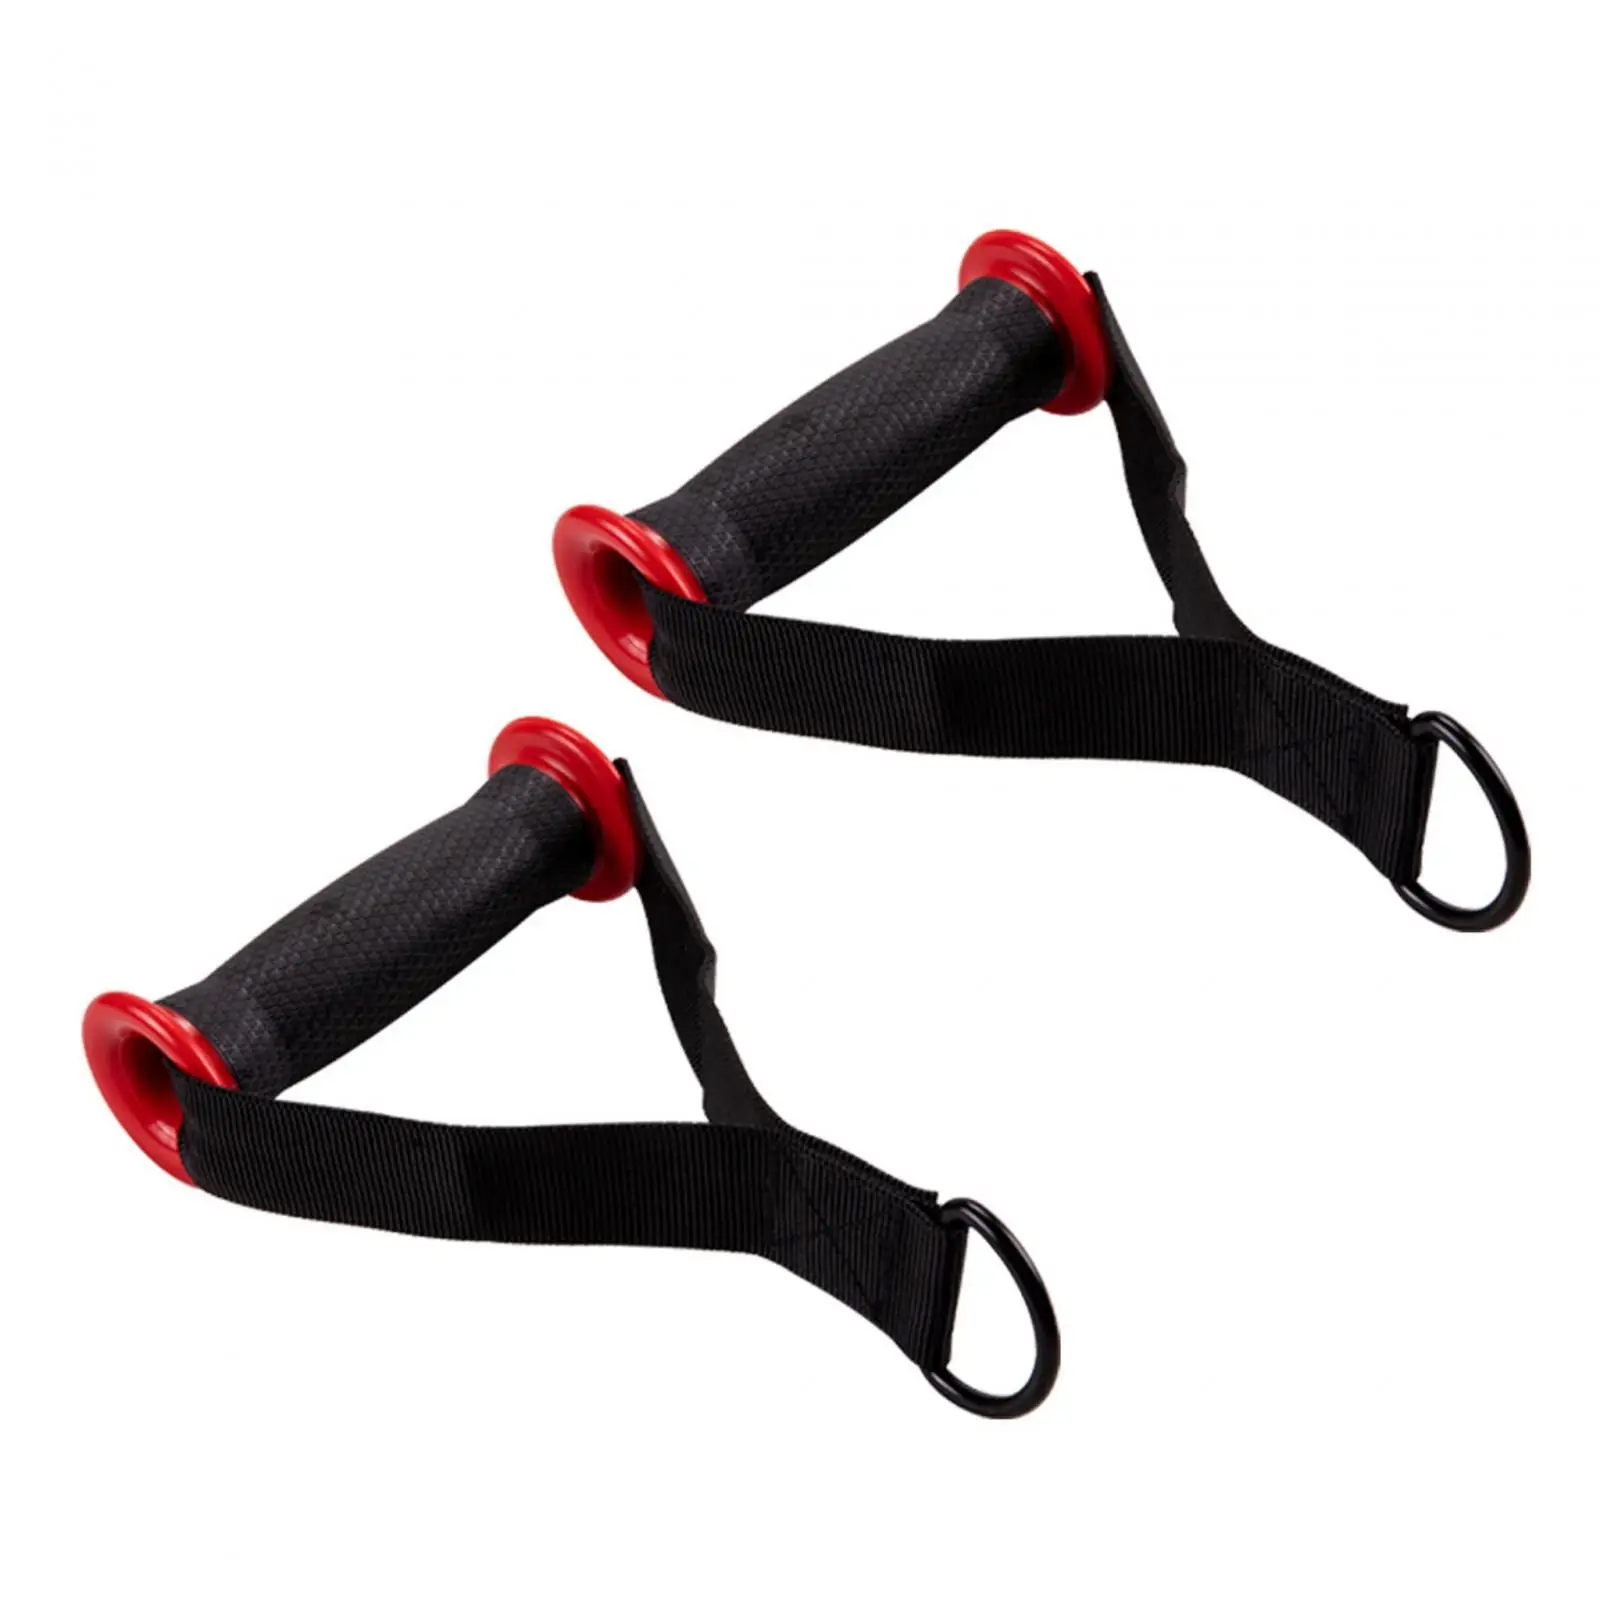 2Pcs Cable Machine Attachment Handles Workout Home Stretch Tube Resistance Exercise Yoga Tricep Rope Press Handles